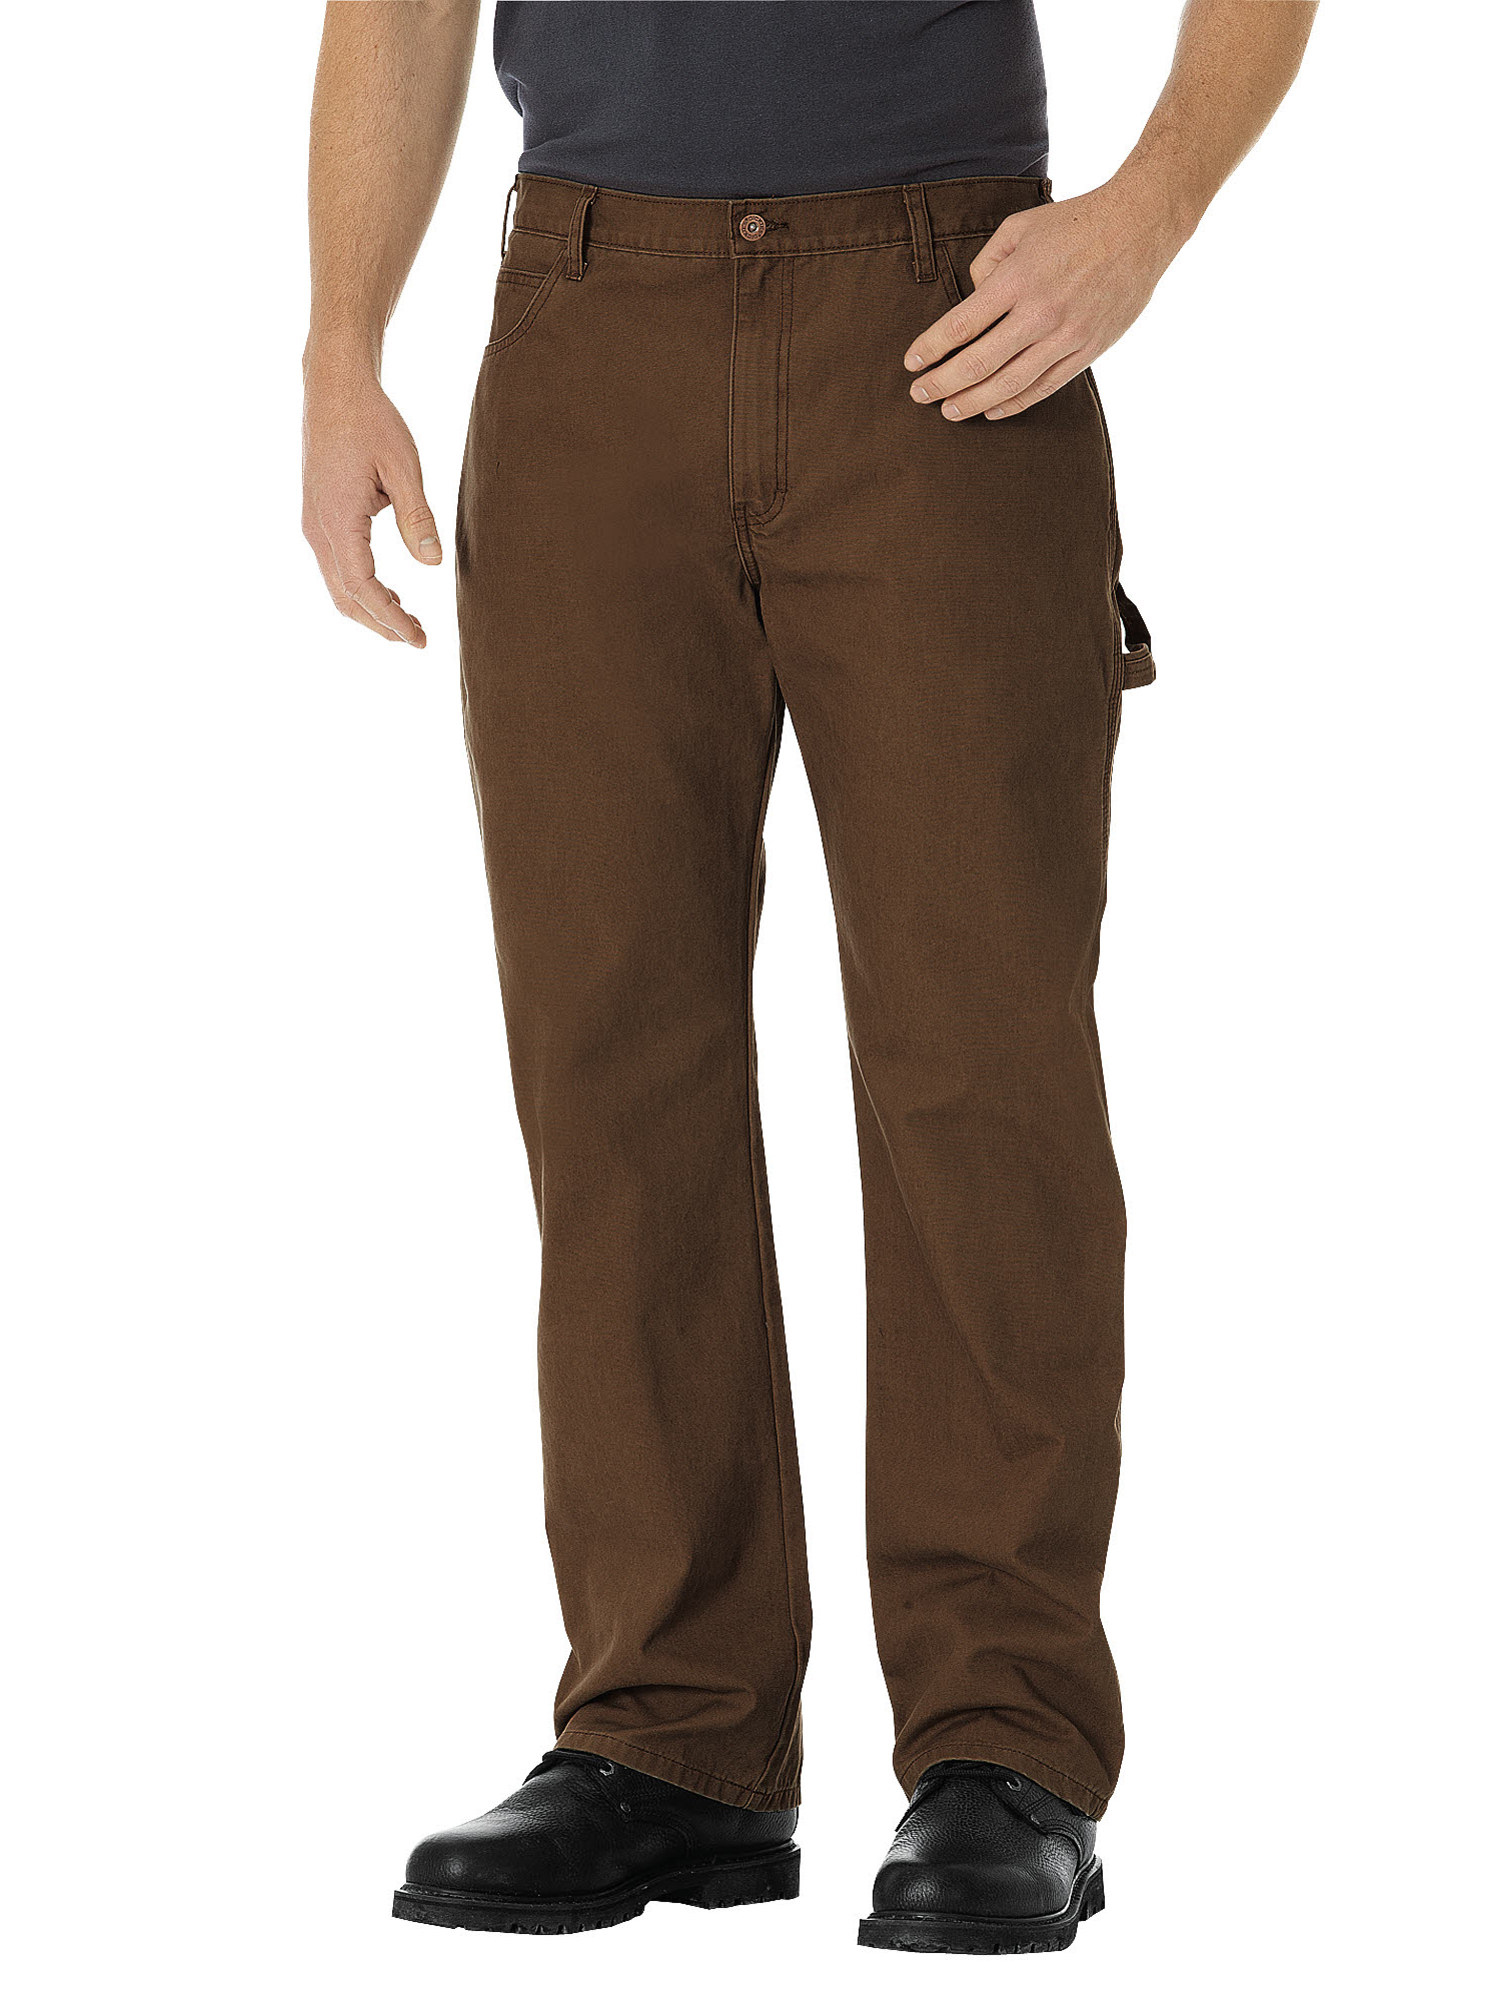 Dickies Mens Relaxed Fit Straight Leg Carpenter Duck Jeans - image 1 of 2